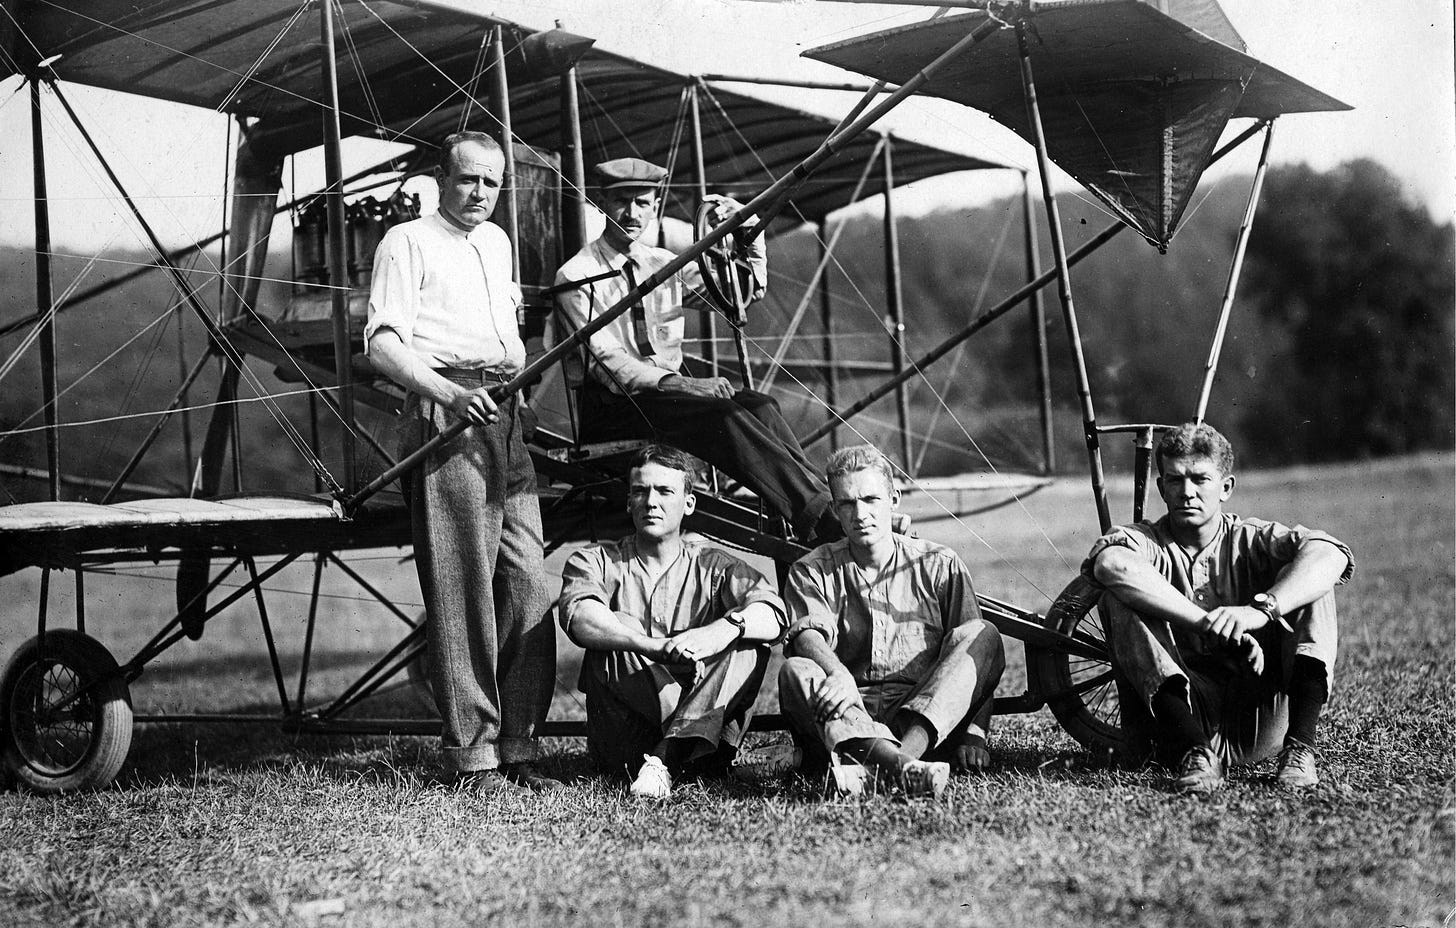 Glenn Curtis sits at the controls of a Curtis A-1 plane. Seated in front of the plane are John Rodgers, John Towers, and Theodore Ellyson. An unidentified man leans against the plane next to Curtis,. (US Navy photo)